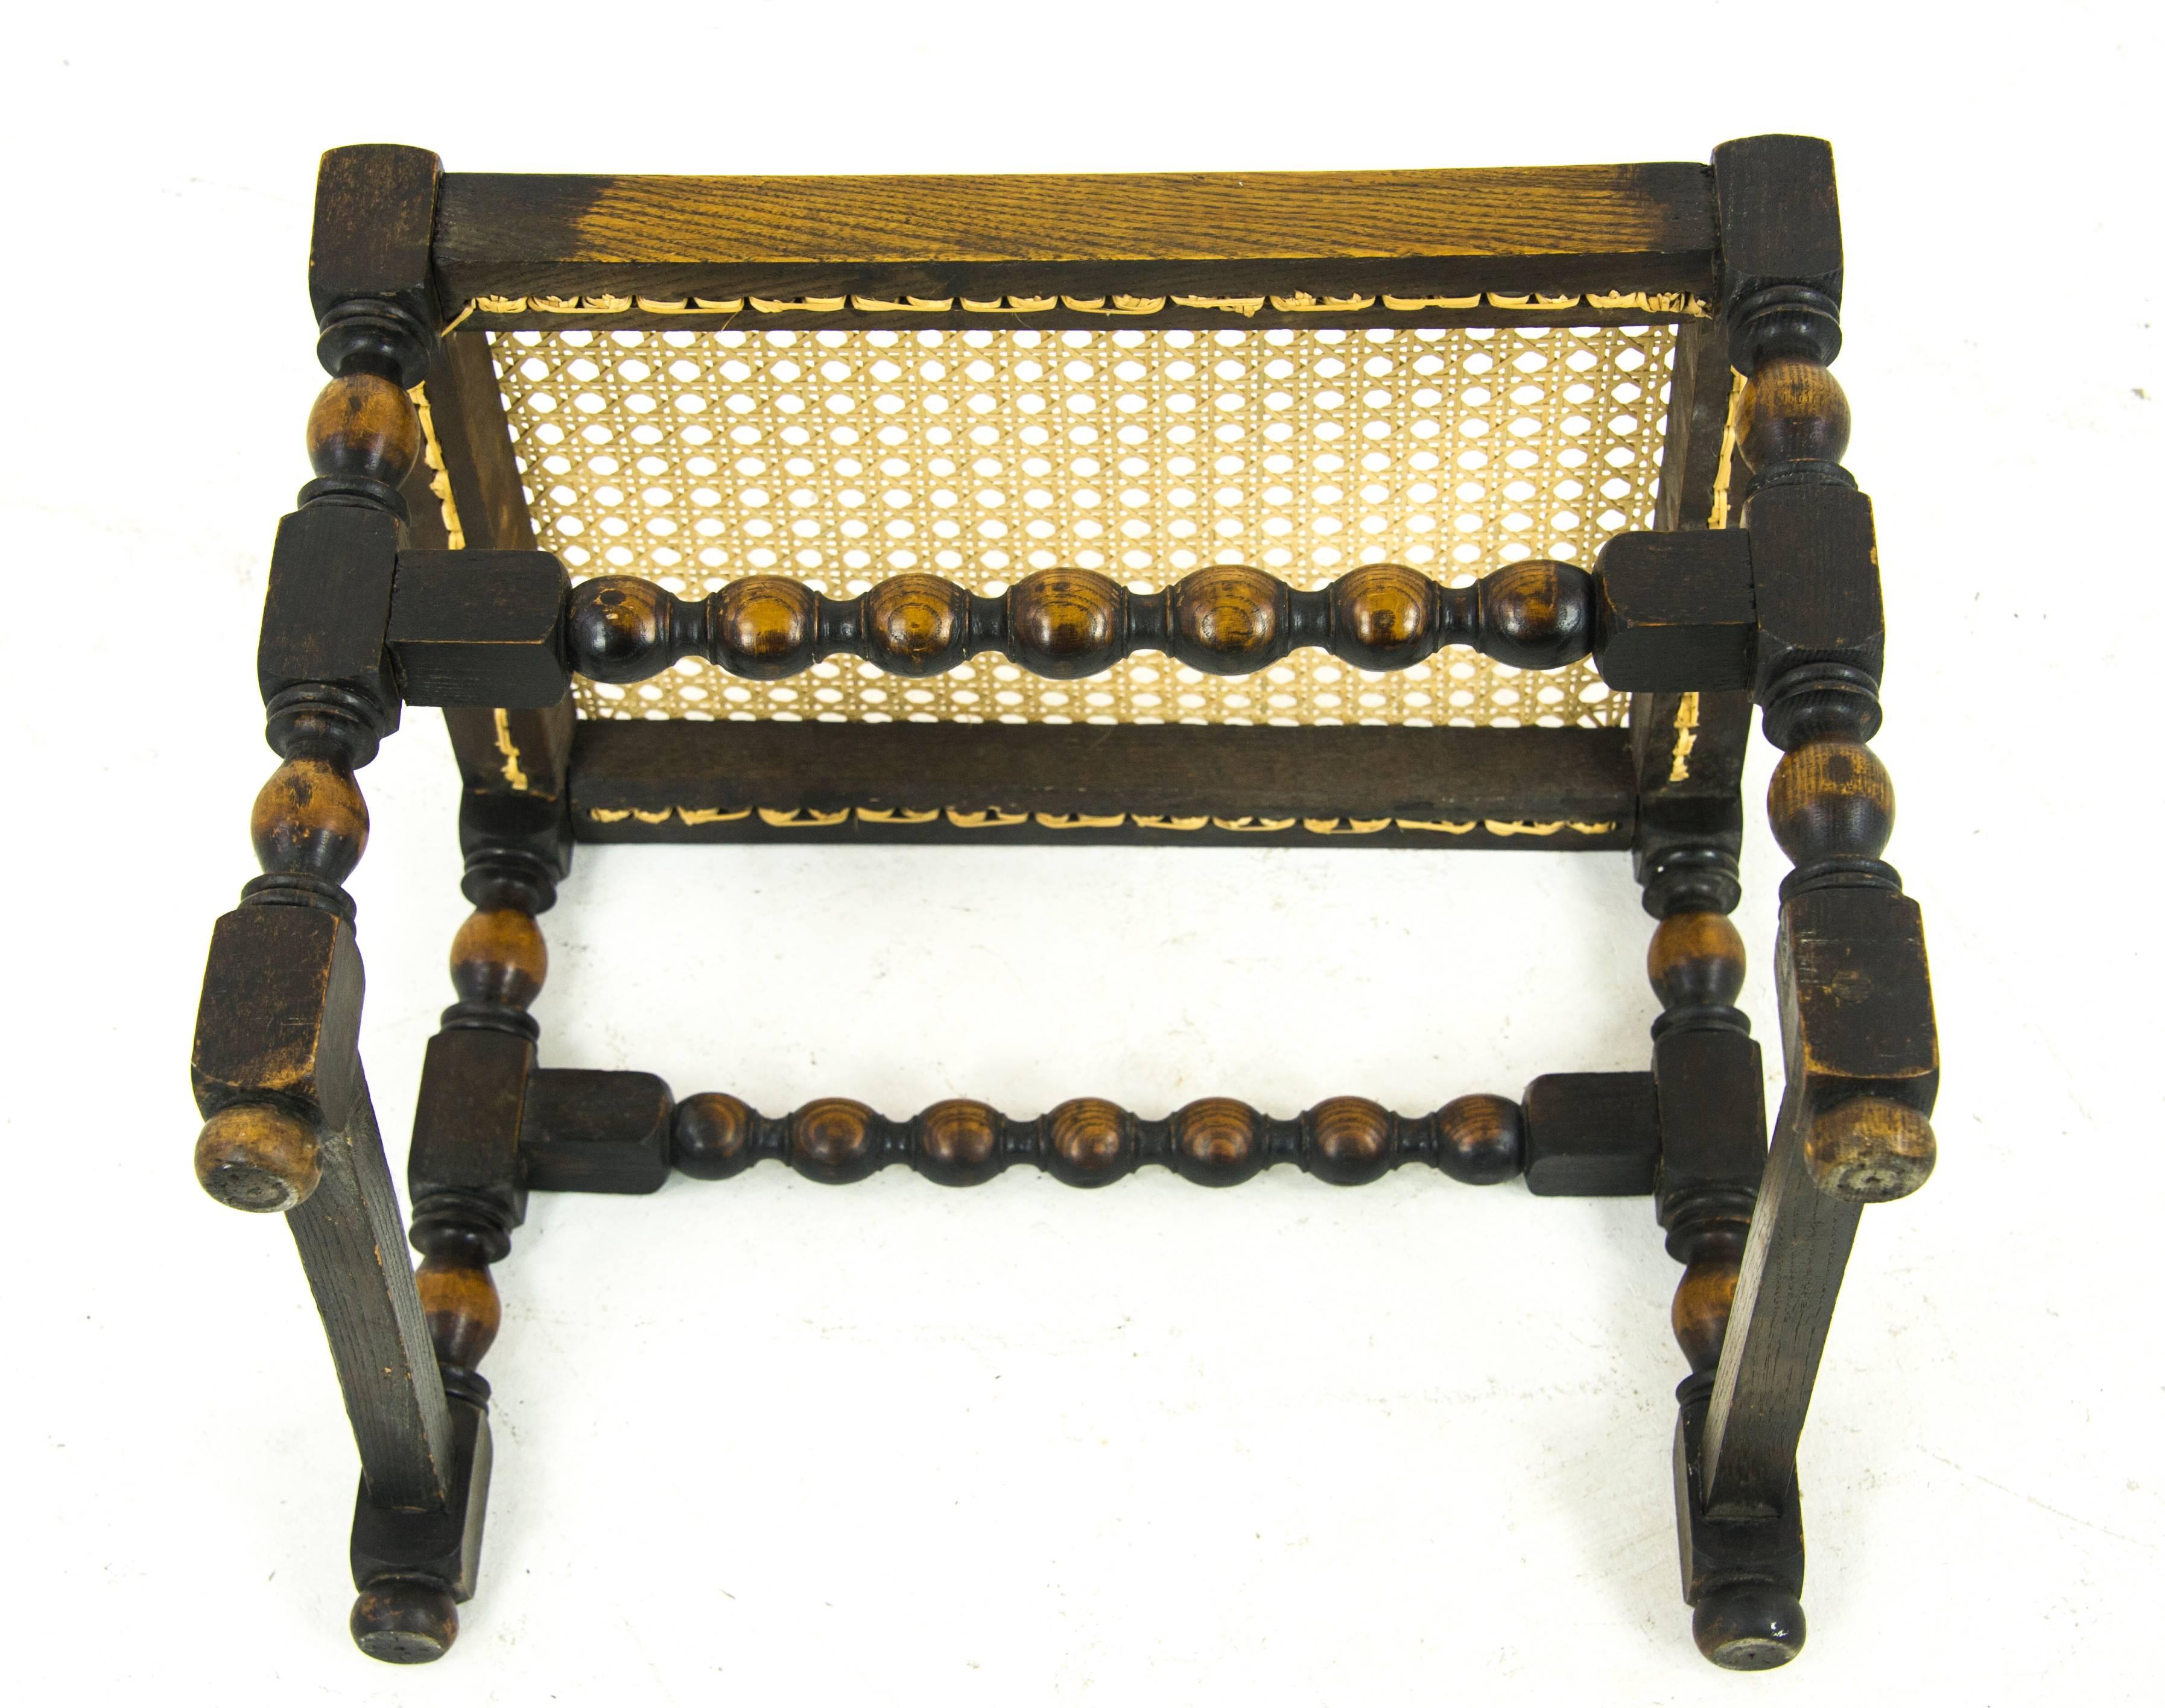 Hand-Crafted Antique Dressing Stool, Caned Top Seat, Beechwood, Antique Furniture   REDUCED!